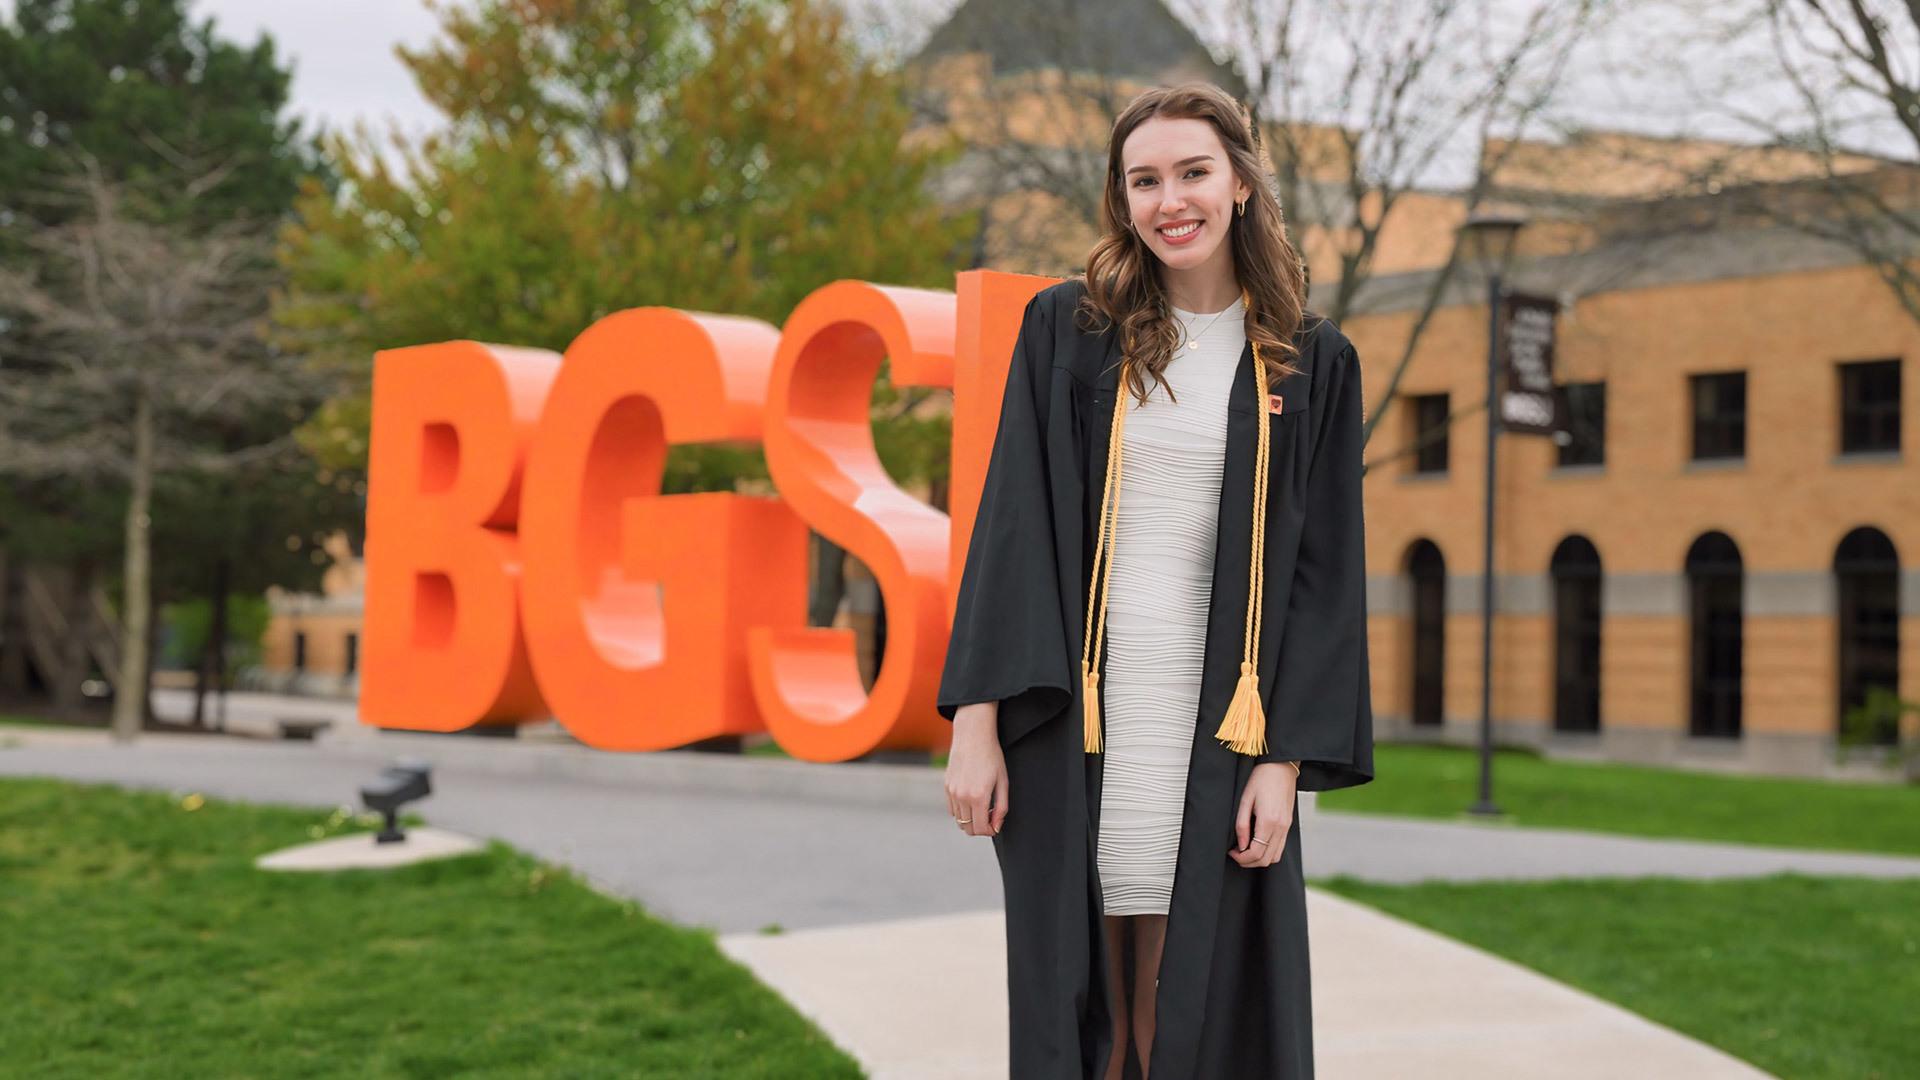 BGSU graduate Bailey Price stands in front of the BGSU letters on campus.